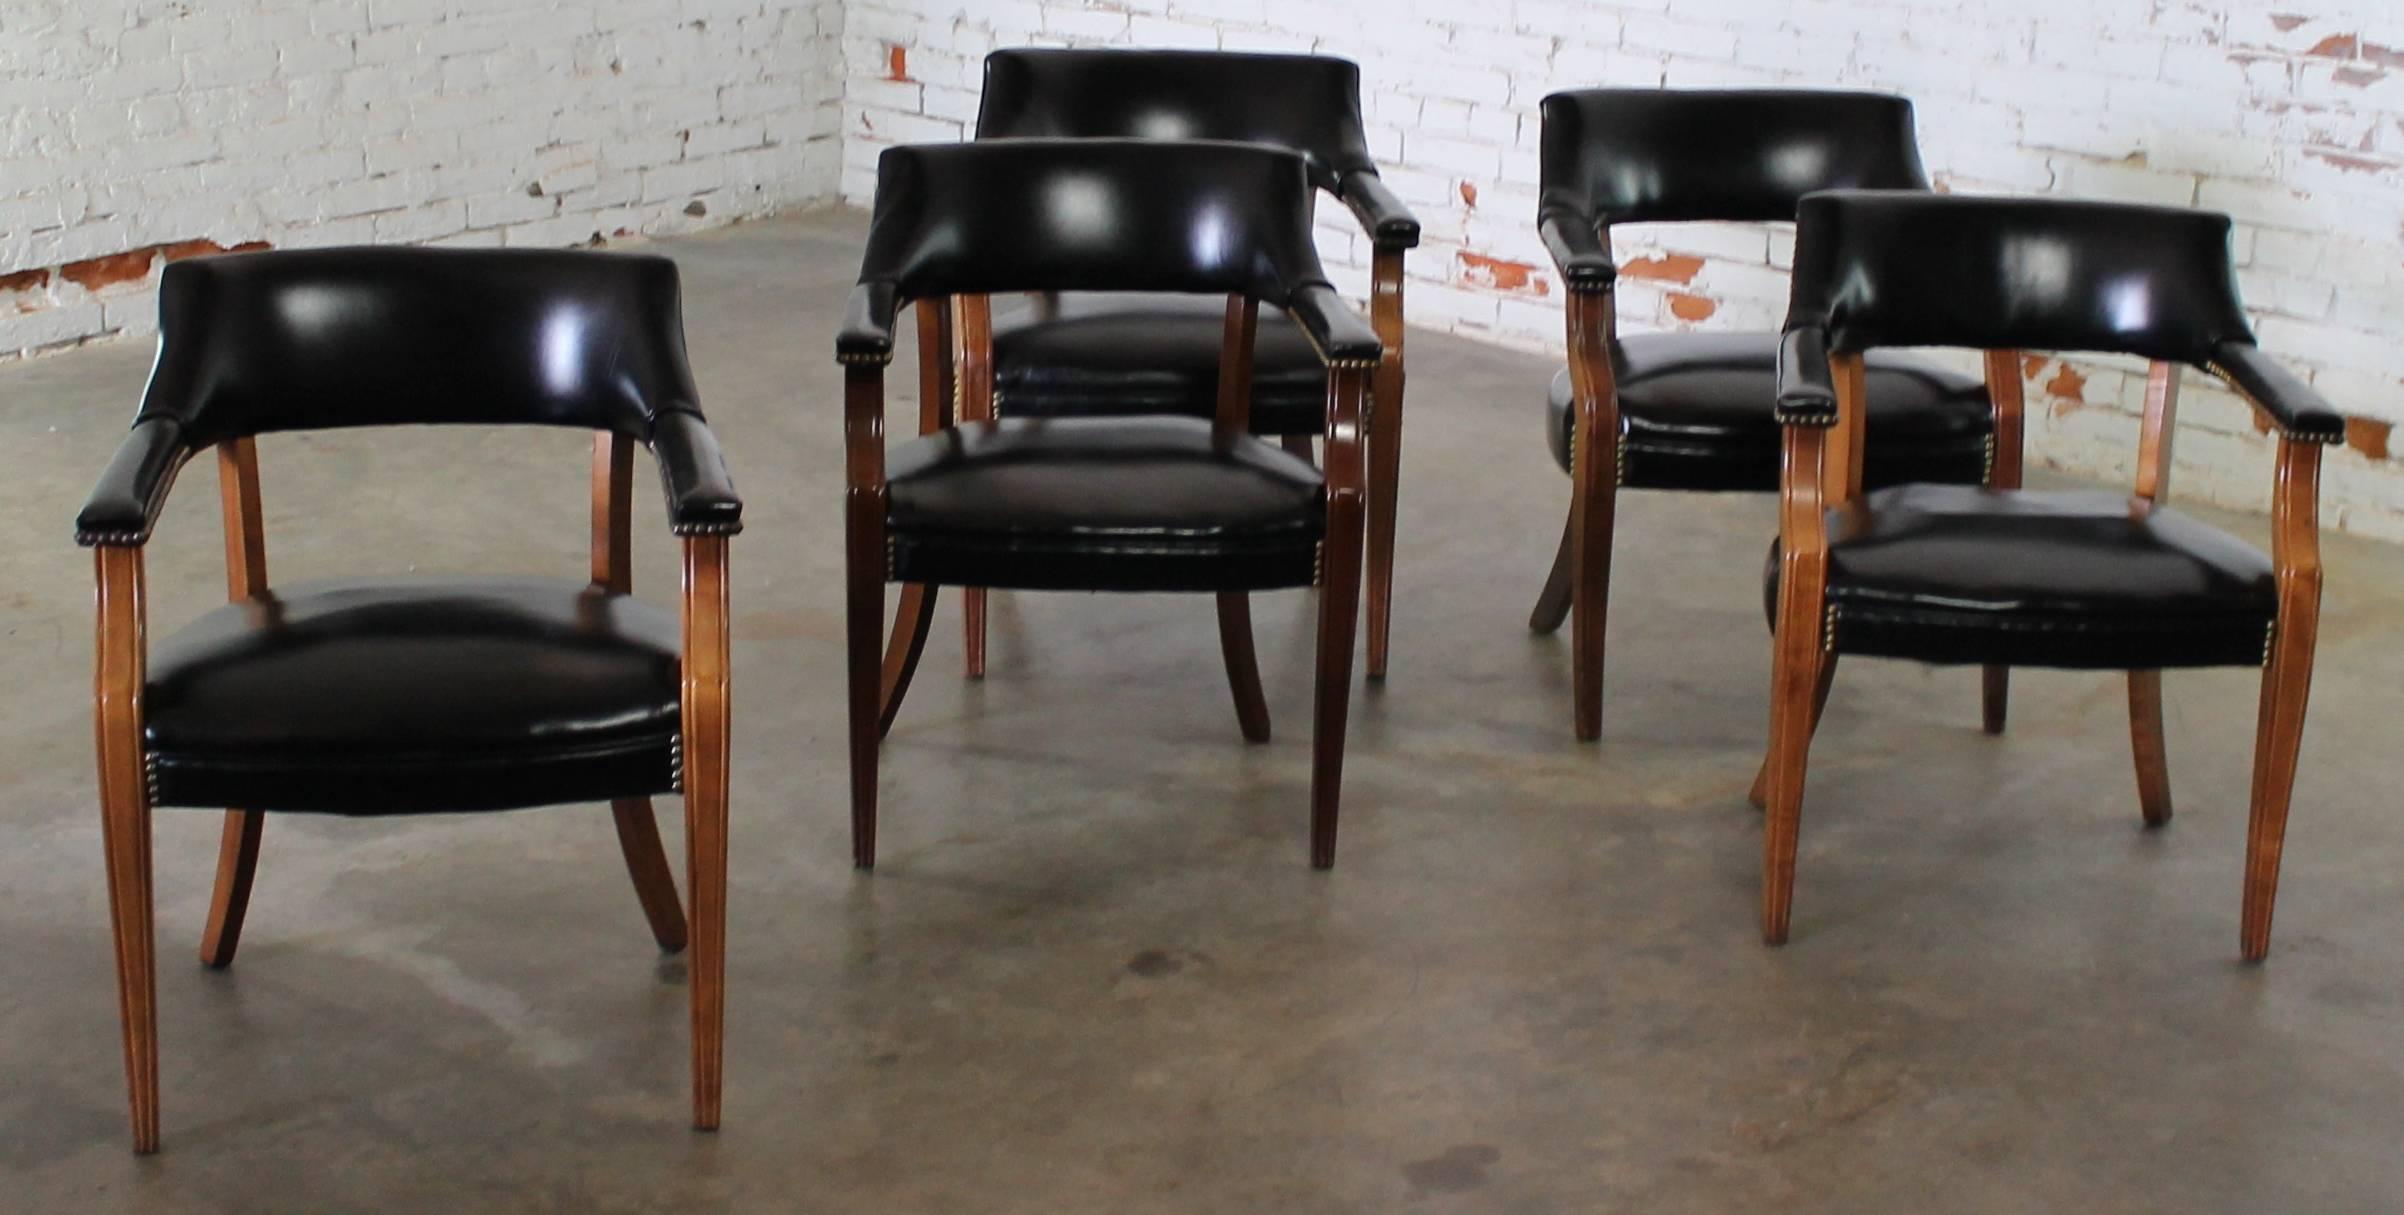 Handsome set of five solid walnut captain chairs with black faux leather upholstery and nailhead detail. Perfect used with a round table for card games or dining.

This set of five vintage captain chairs are in extremely great shape. They are